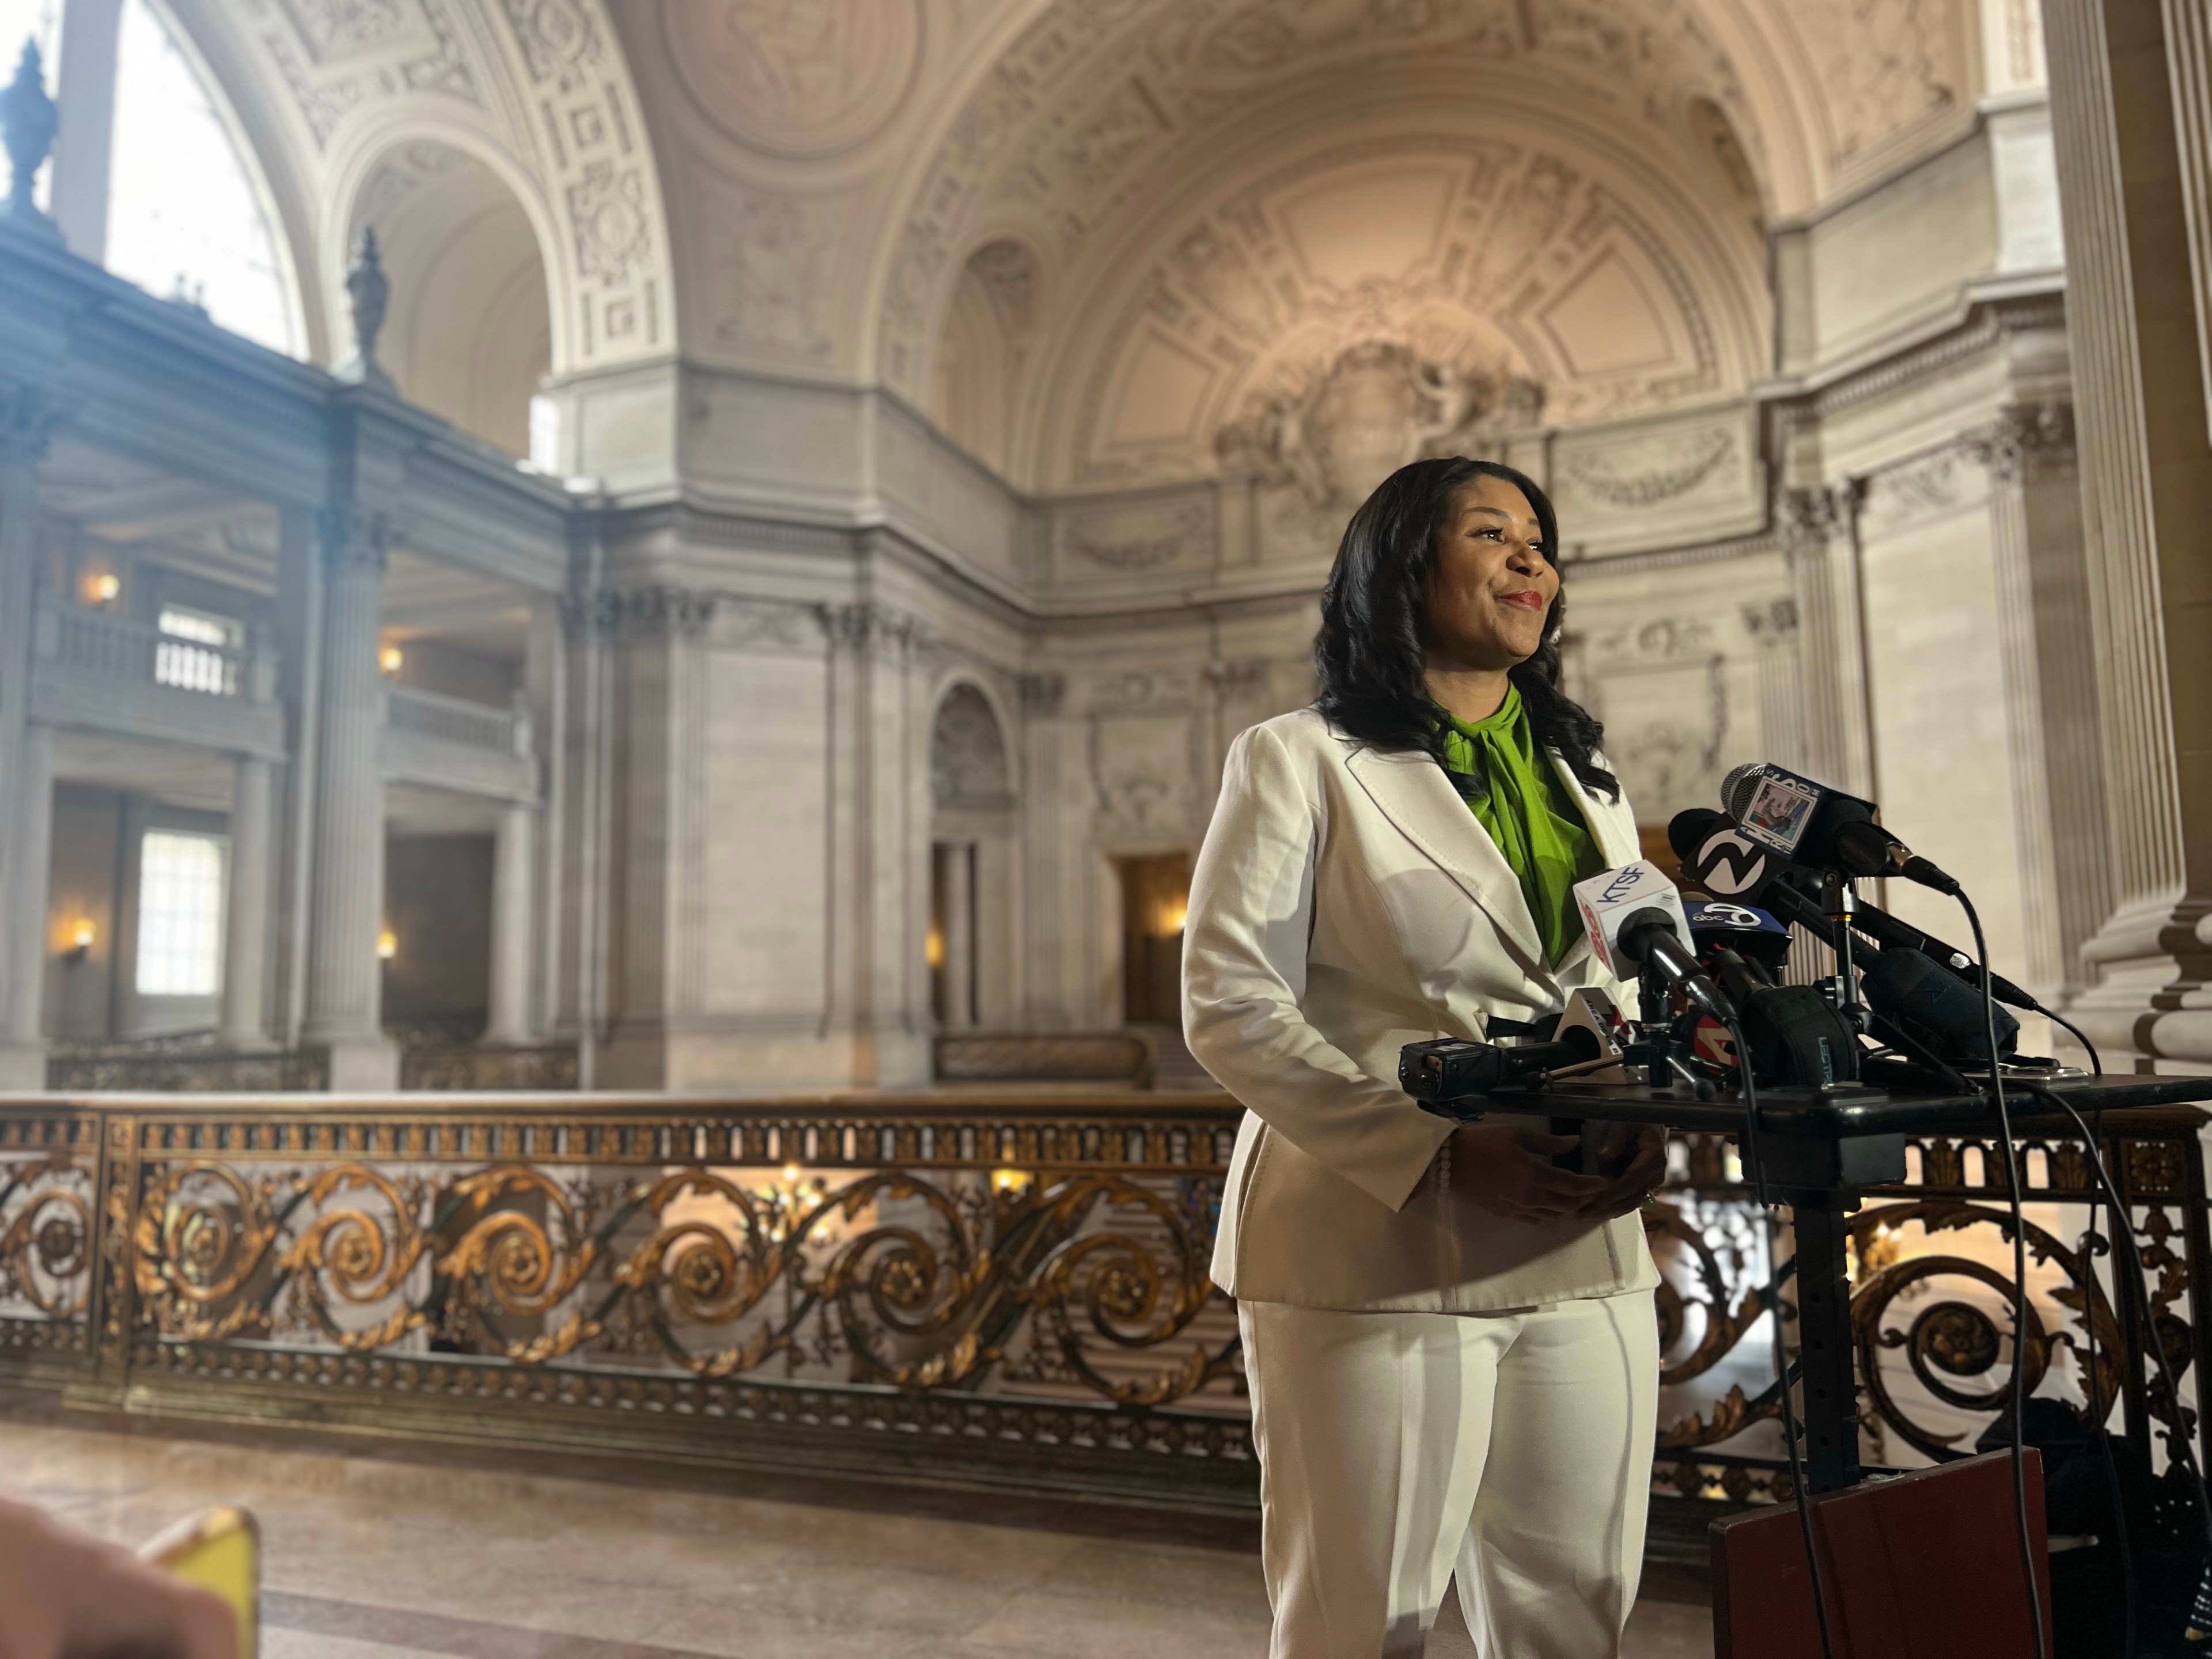 A woman in a white suit speaks at a podium with microphones, inside a grand hall with ornate architecture.